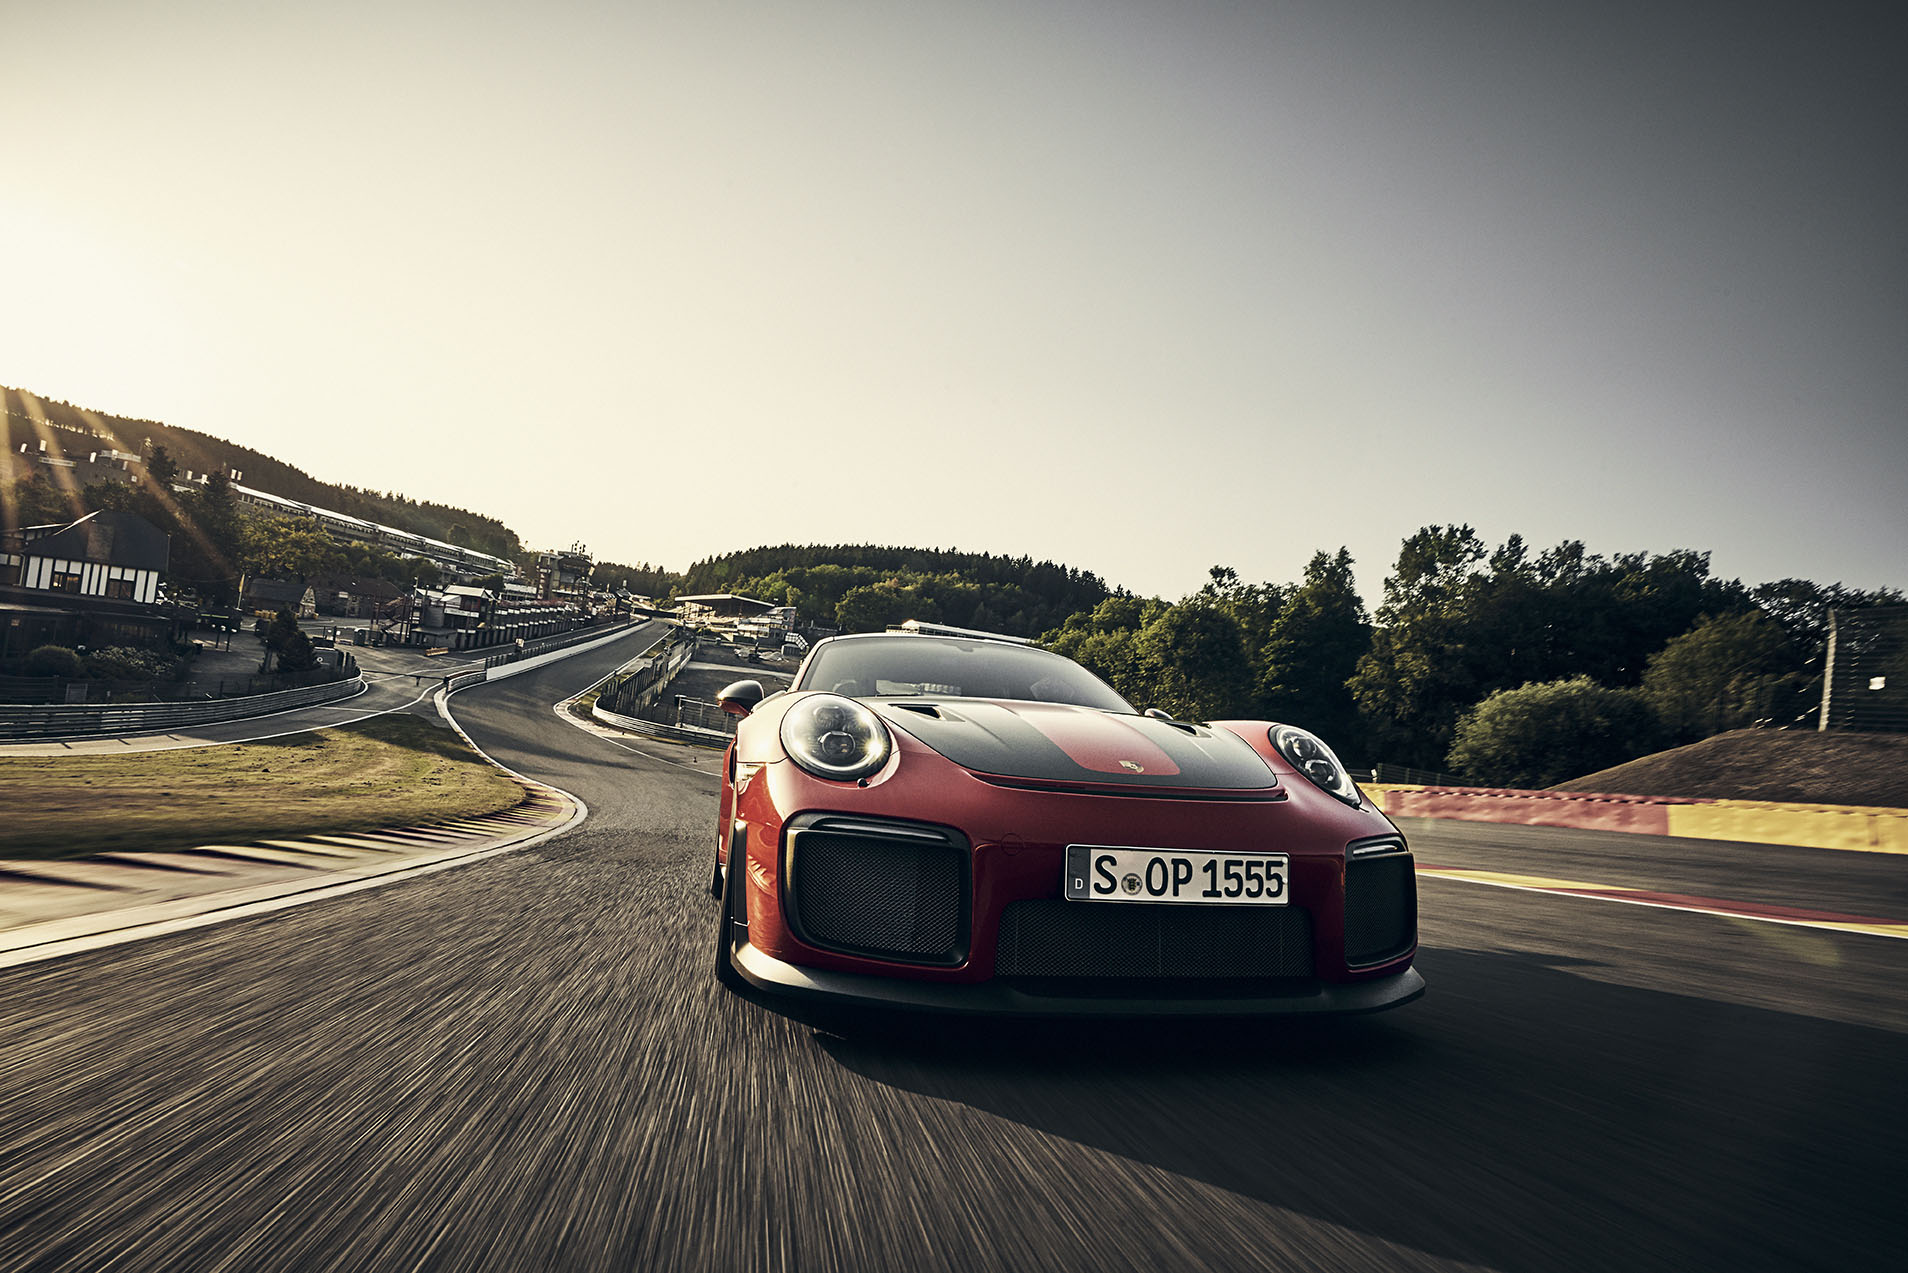 Spa-Francorchamps is the ideal race track for a strong Porsche